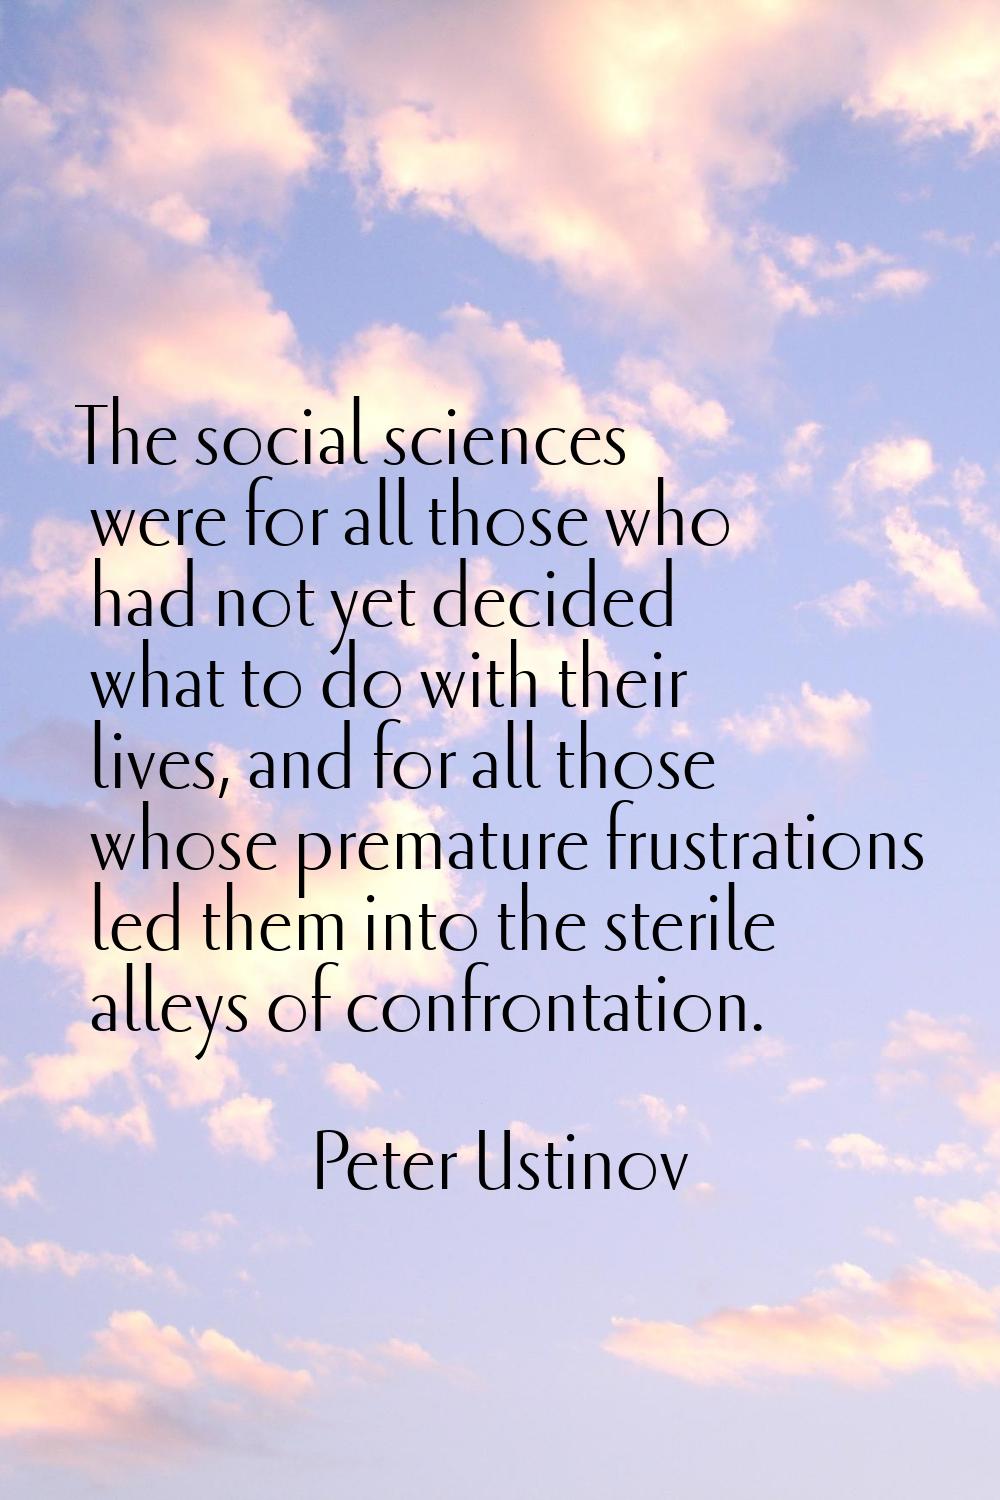 The social sciences were for all those who had not yet decided what to do with their lives, and for